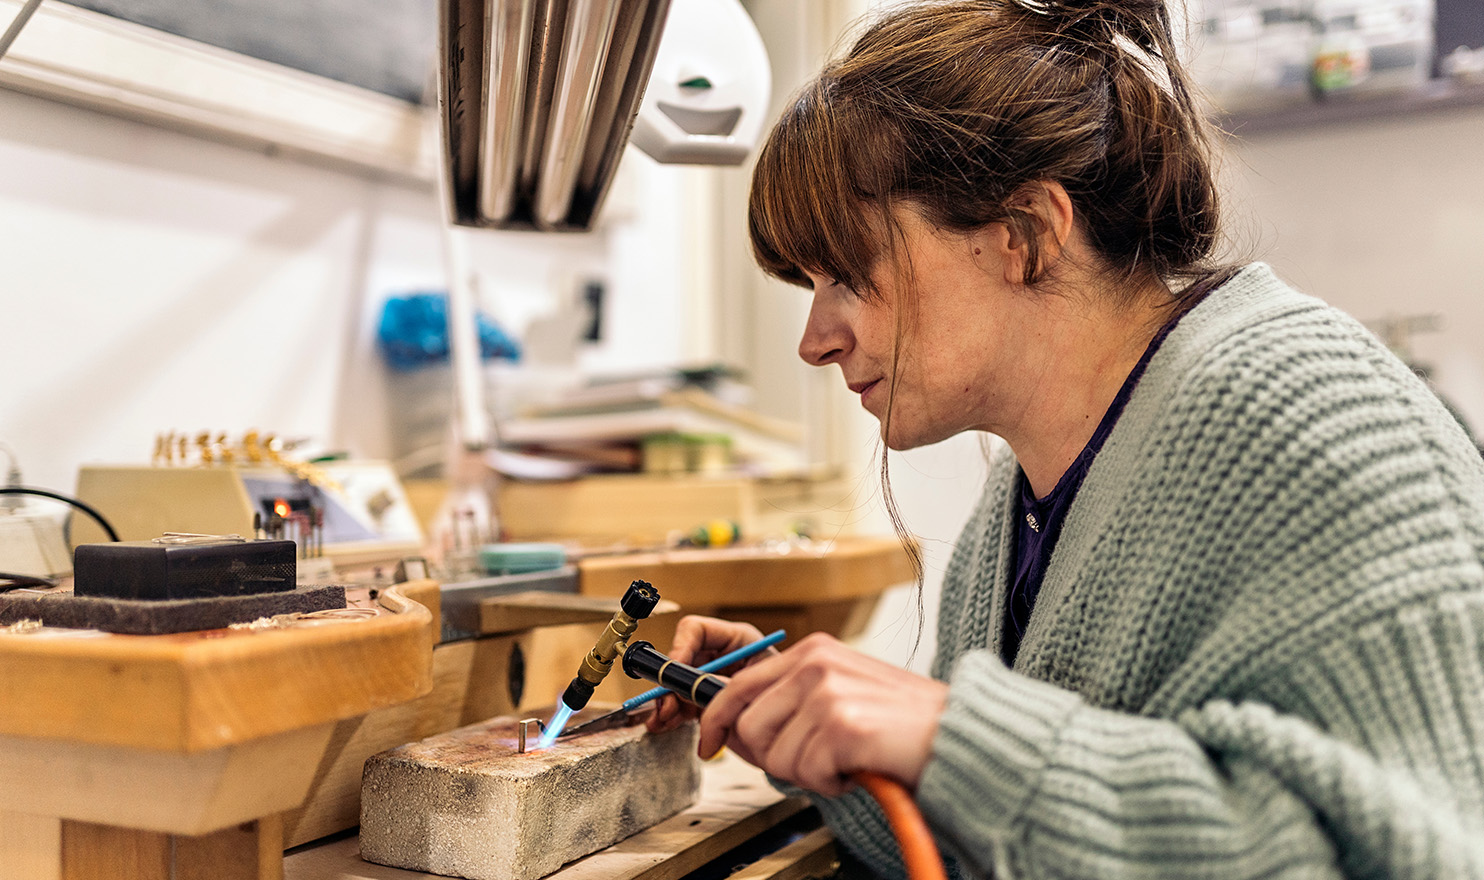 A jeweler is crafting a new piece in their workshop with various tools.